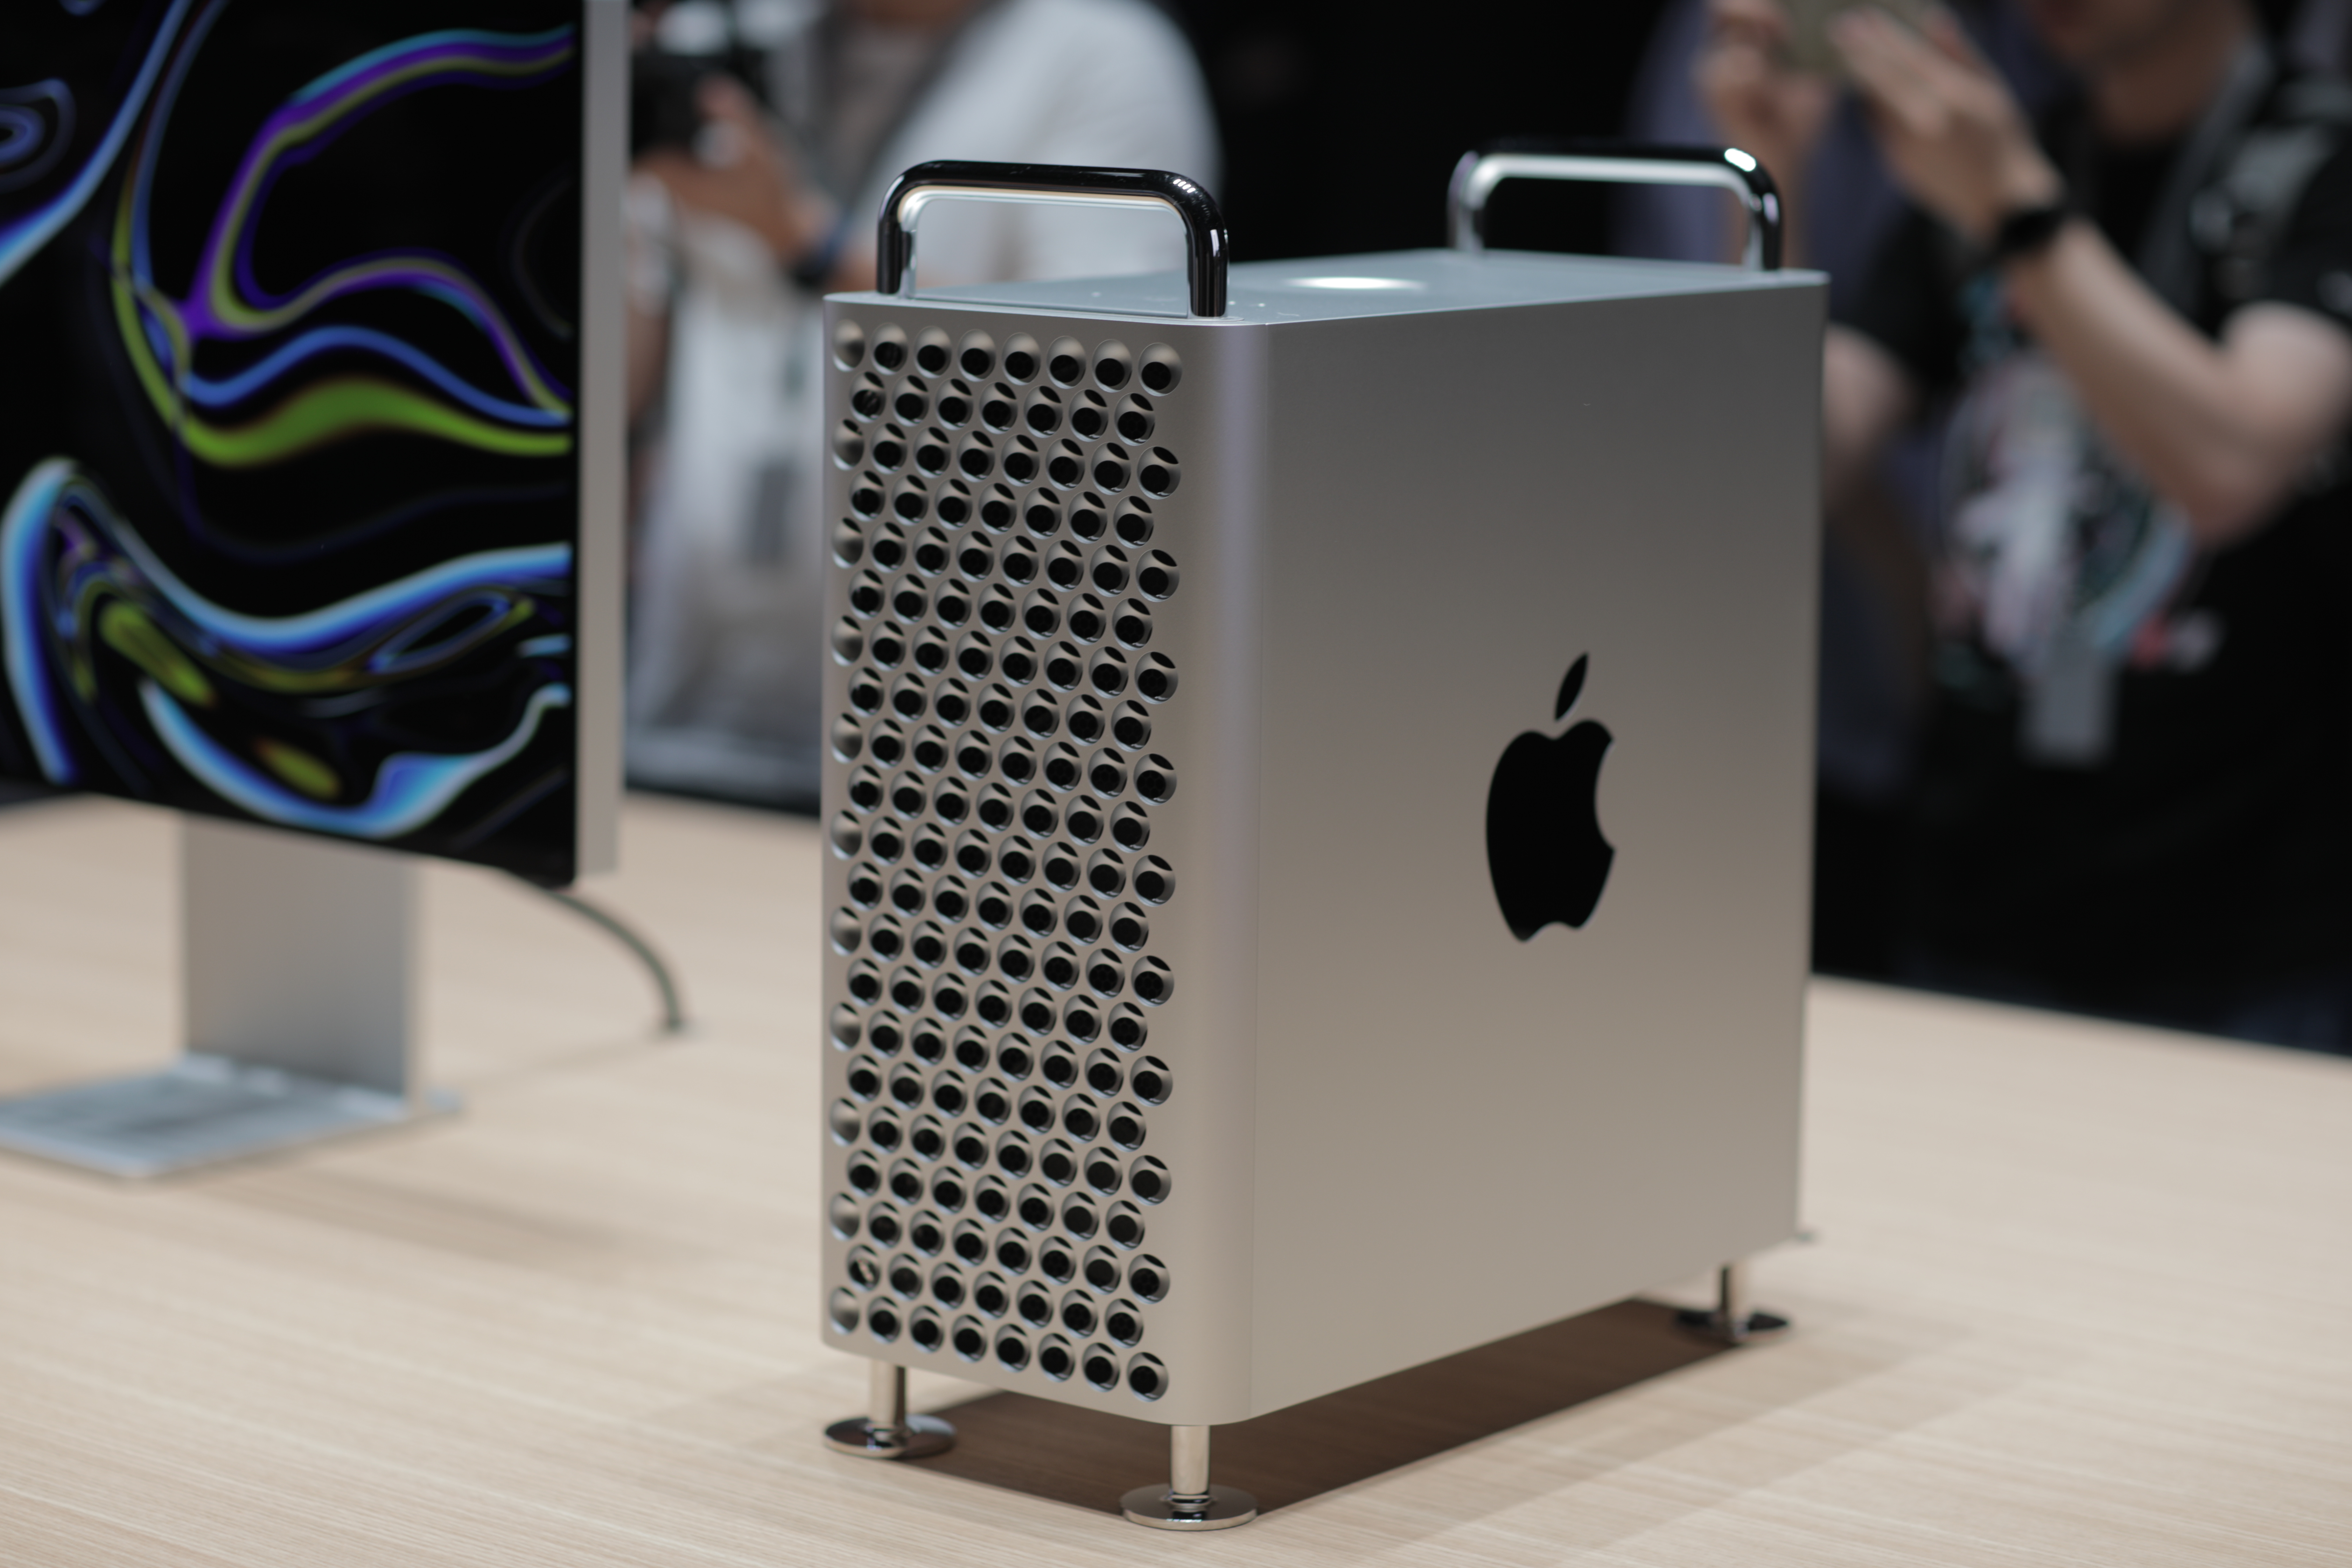 Apple is back to cheese graters because it's hard to upgrade a trash can -  The Verge